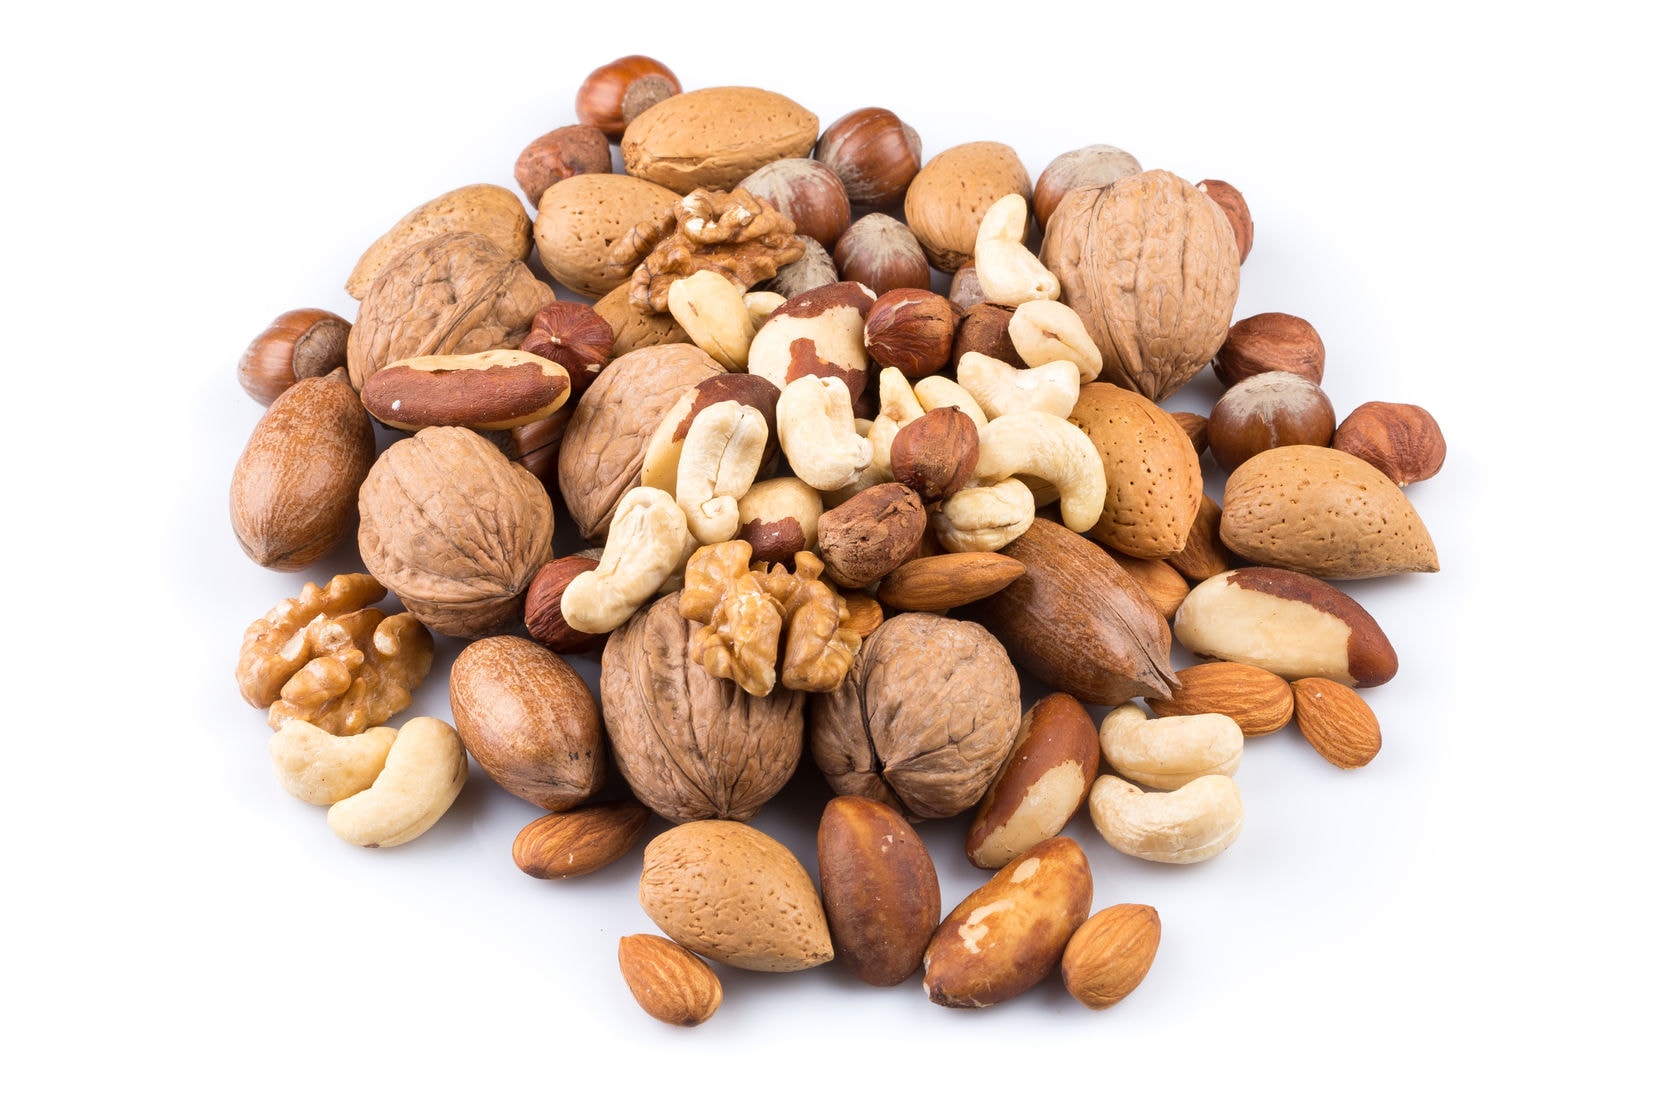 eating nuts prevents cardiovascular disease and cancer